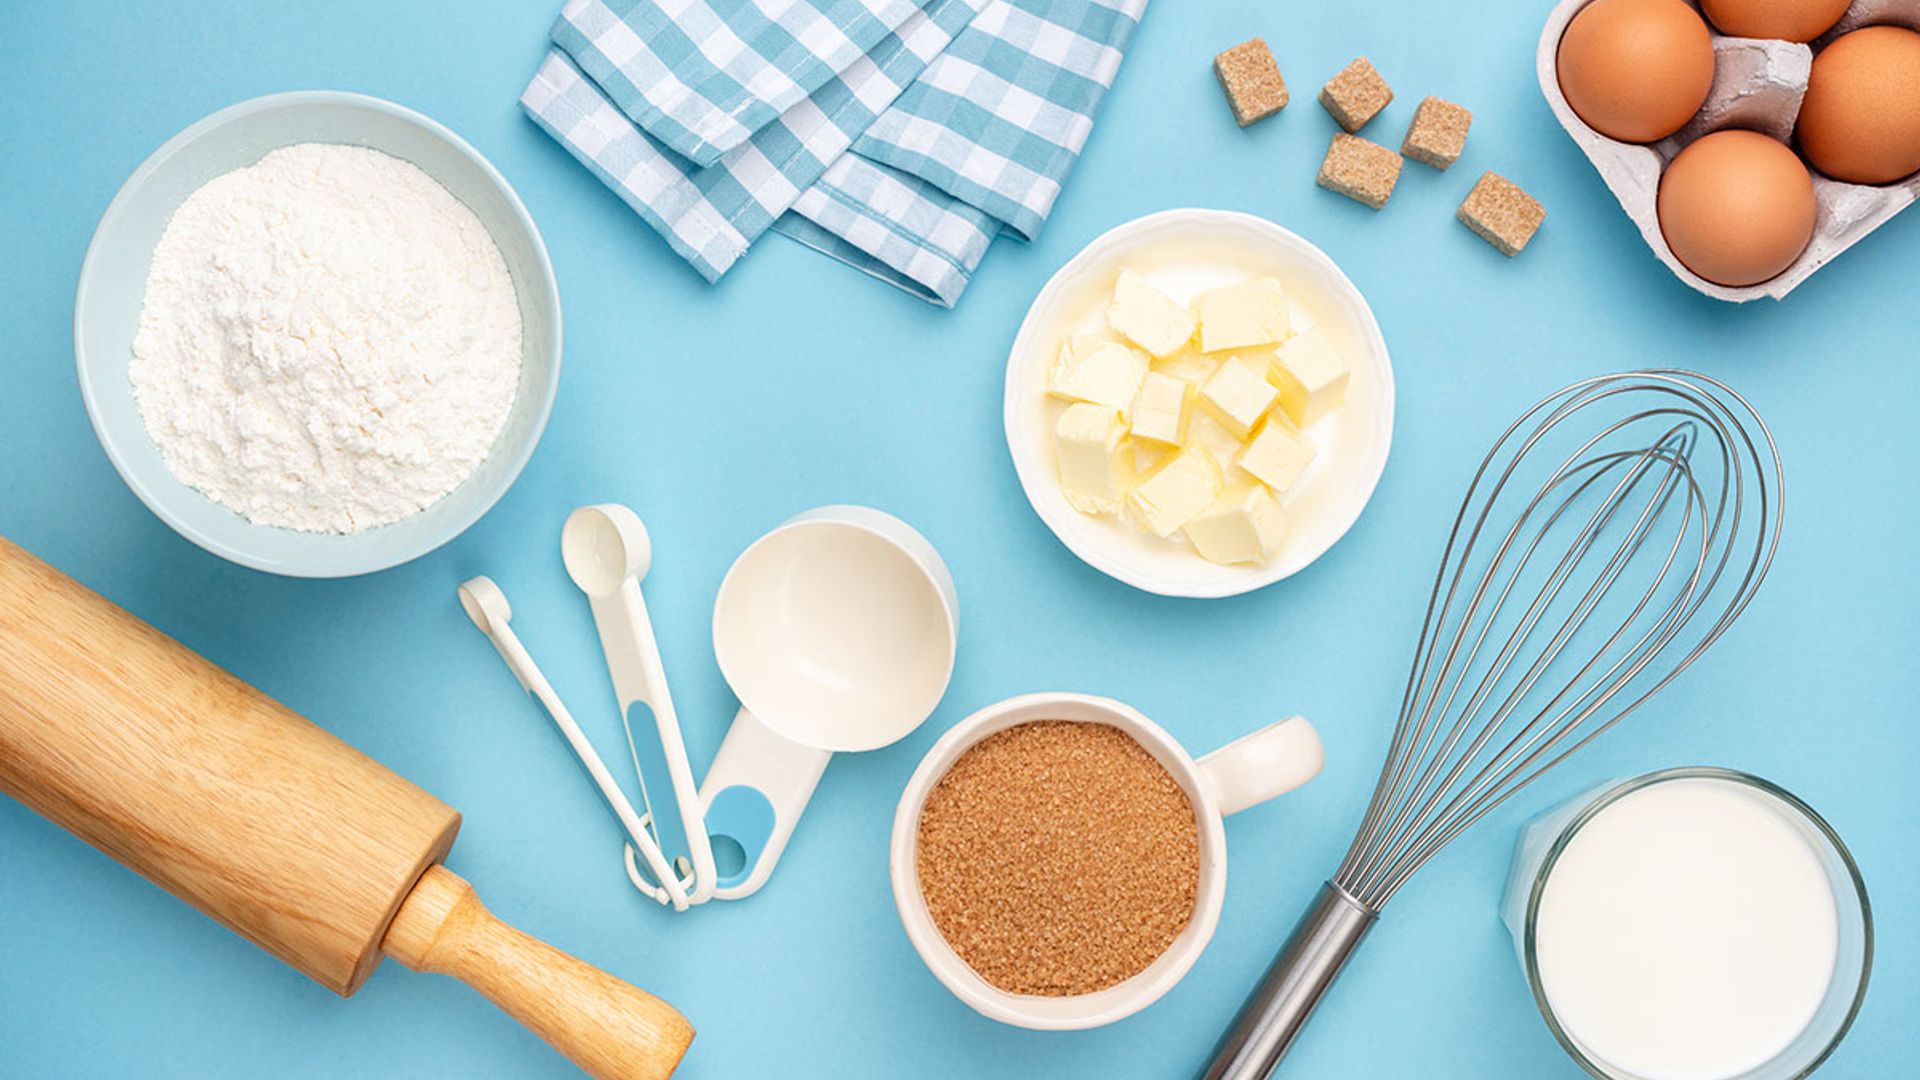 5 easy baking swaps if you can't get flour, eggs and other basic ingredients